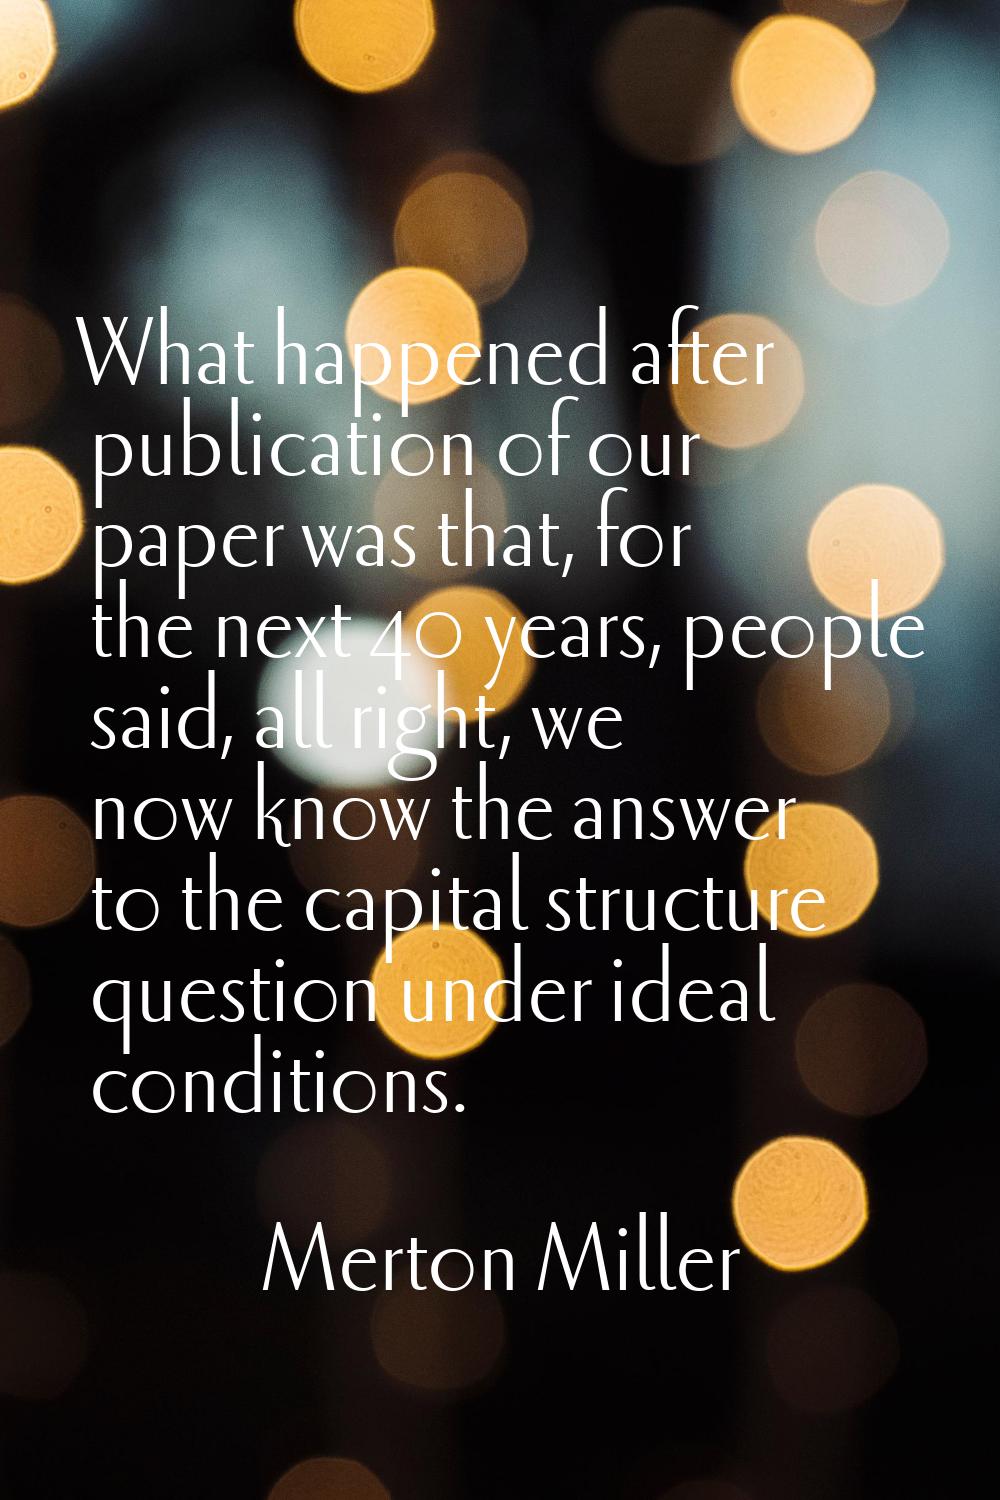 What happened after publication of our paper was that, for the next 40 years, people said, all righ